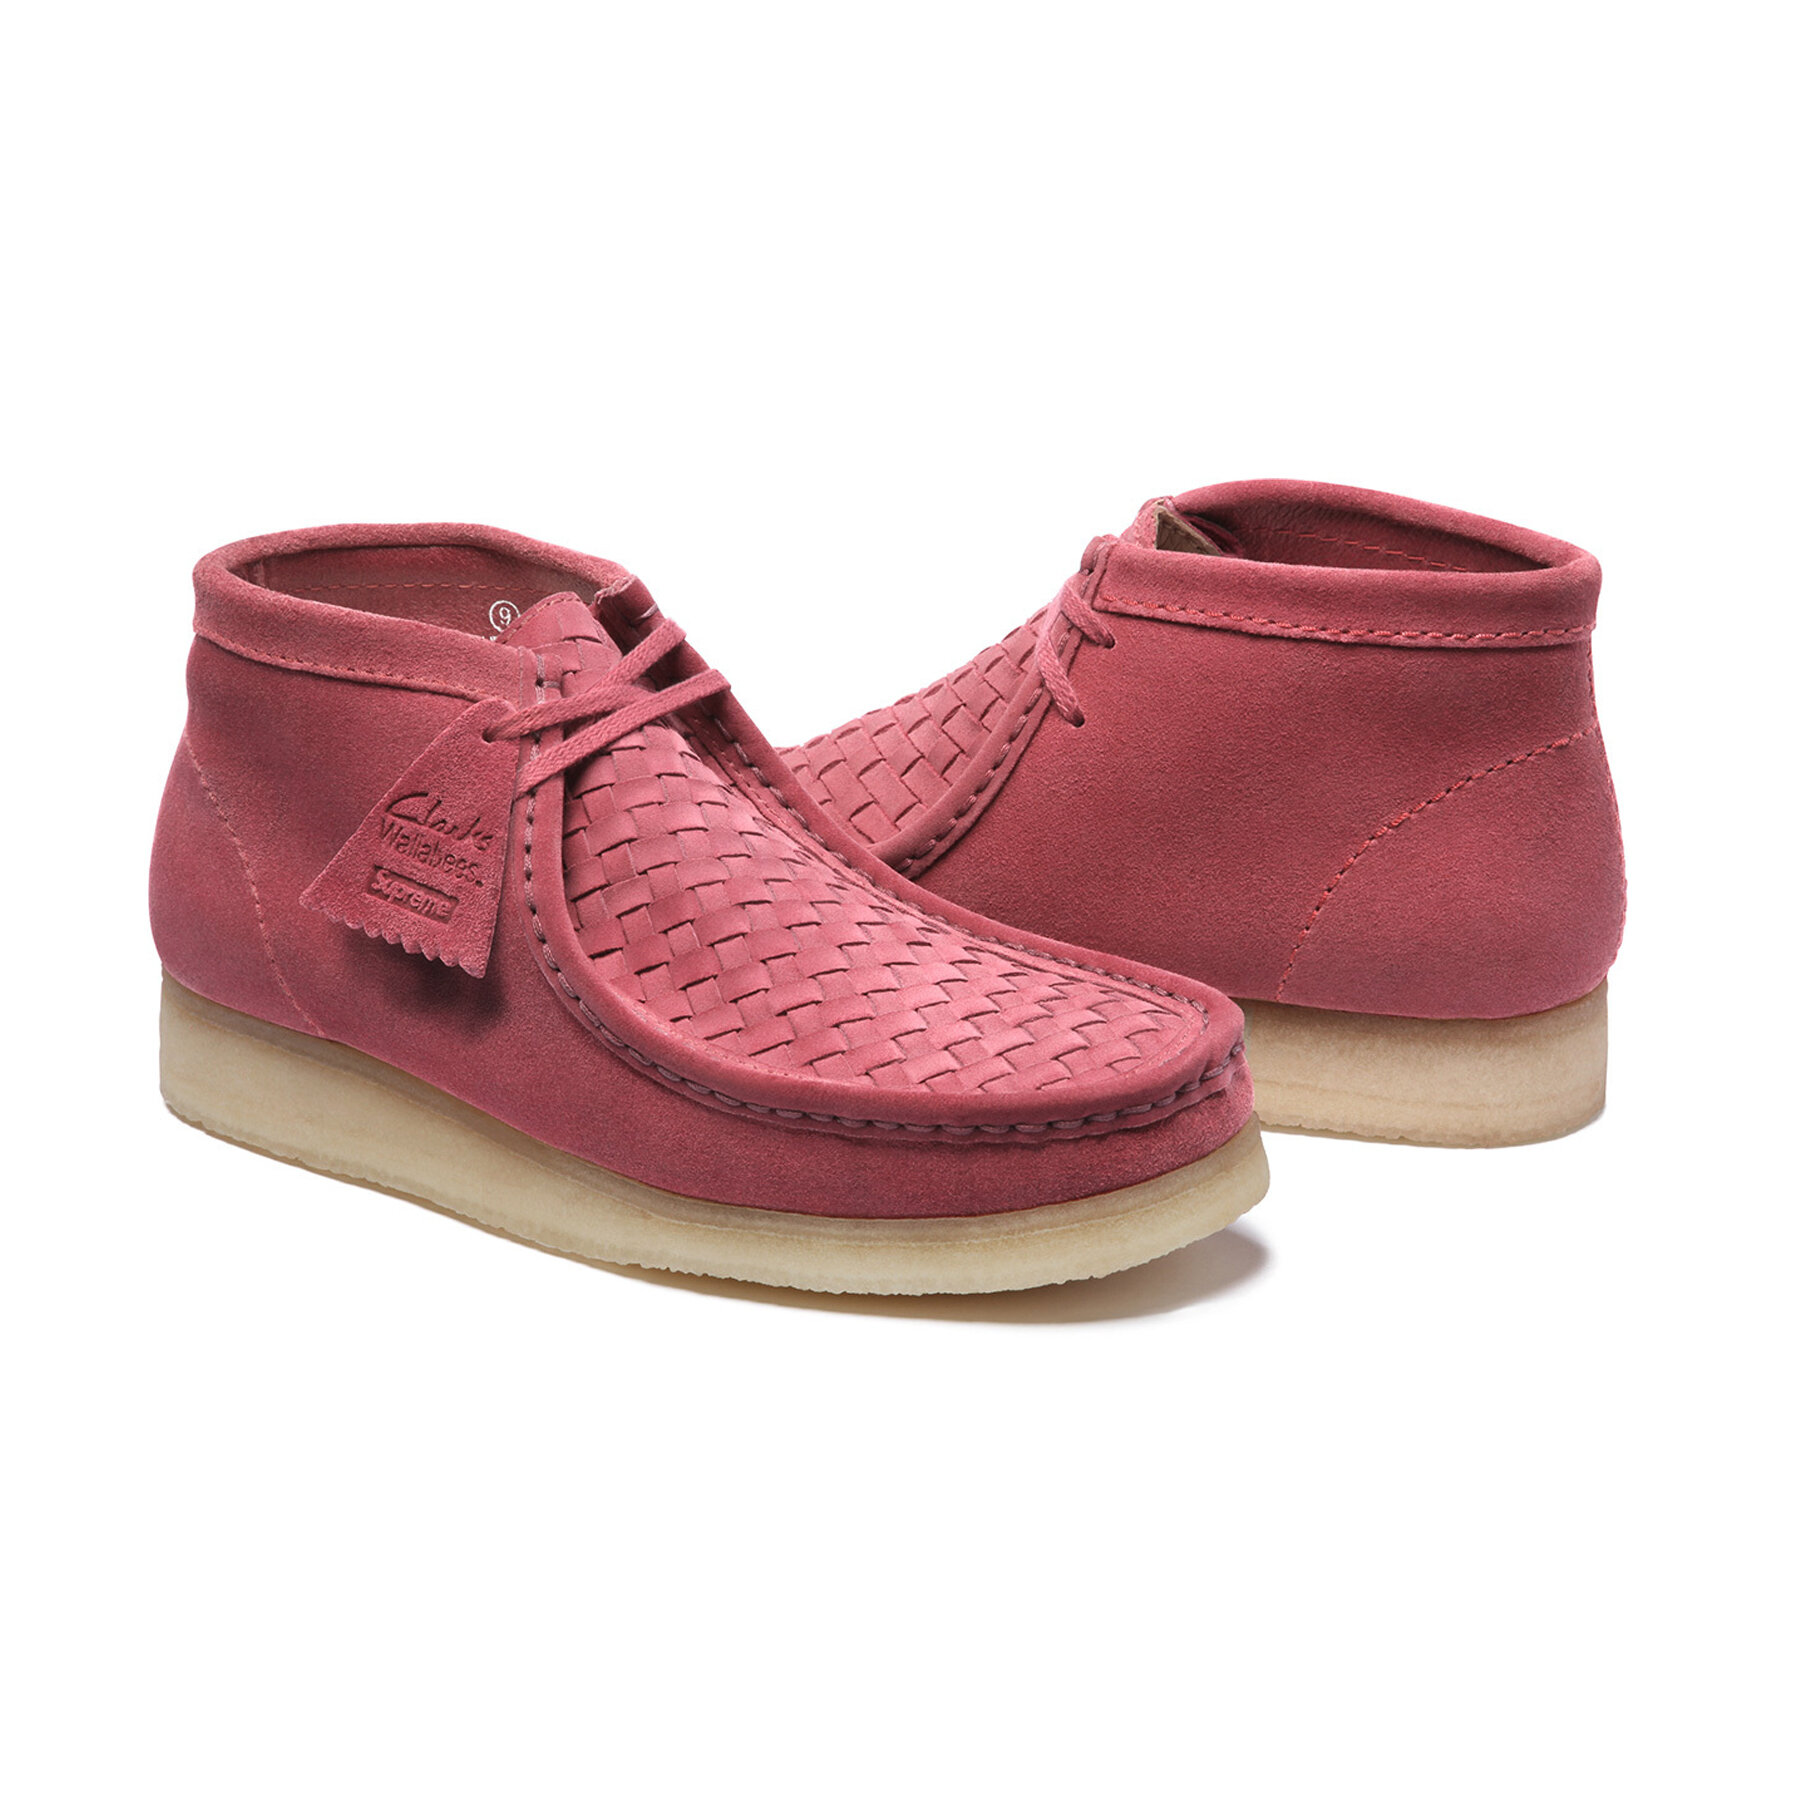 SS16 Supreme x Clarks Wallabee BT 'Rose' (2016) The Pop-Up📍